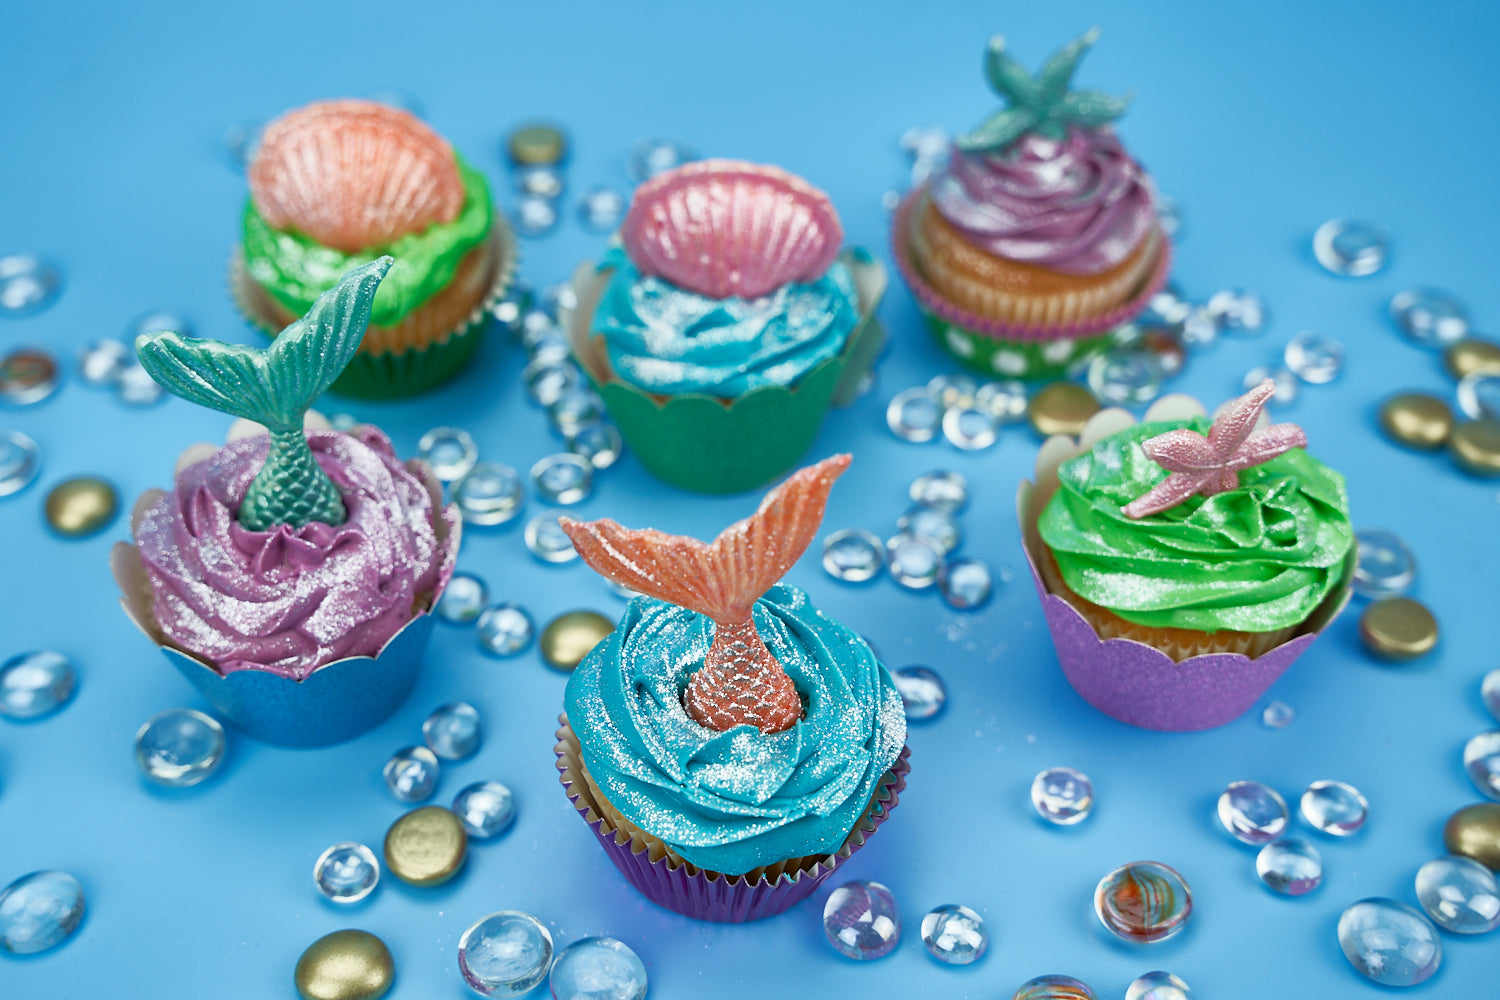 How To Make Edible Cupcake Toppers, The Easy Way - Delight&Dazzle